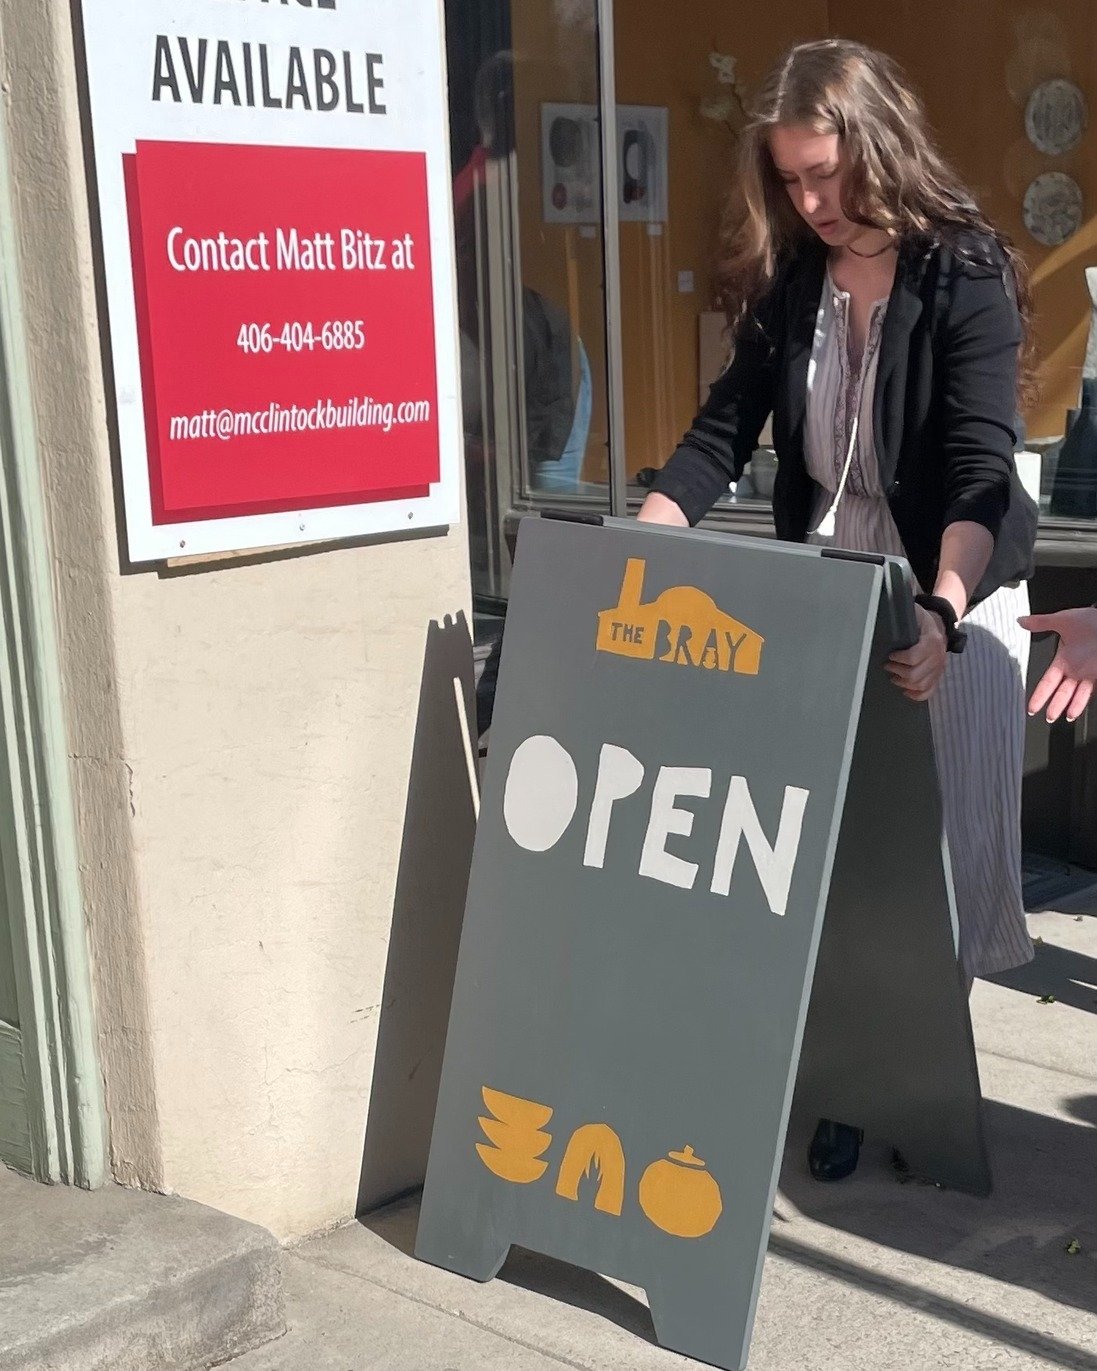 Congratulations to the Archie Bray Foundation for the Ceramic Arts for opening a new gallery space on Last Chance Gulch! Check out this new space next time you find yourself in downtown Helena.